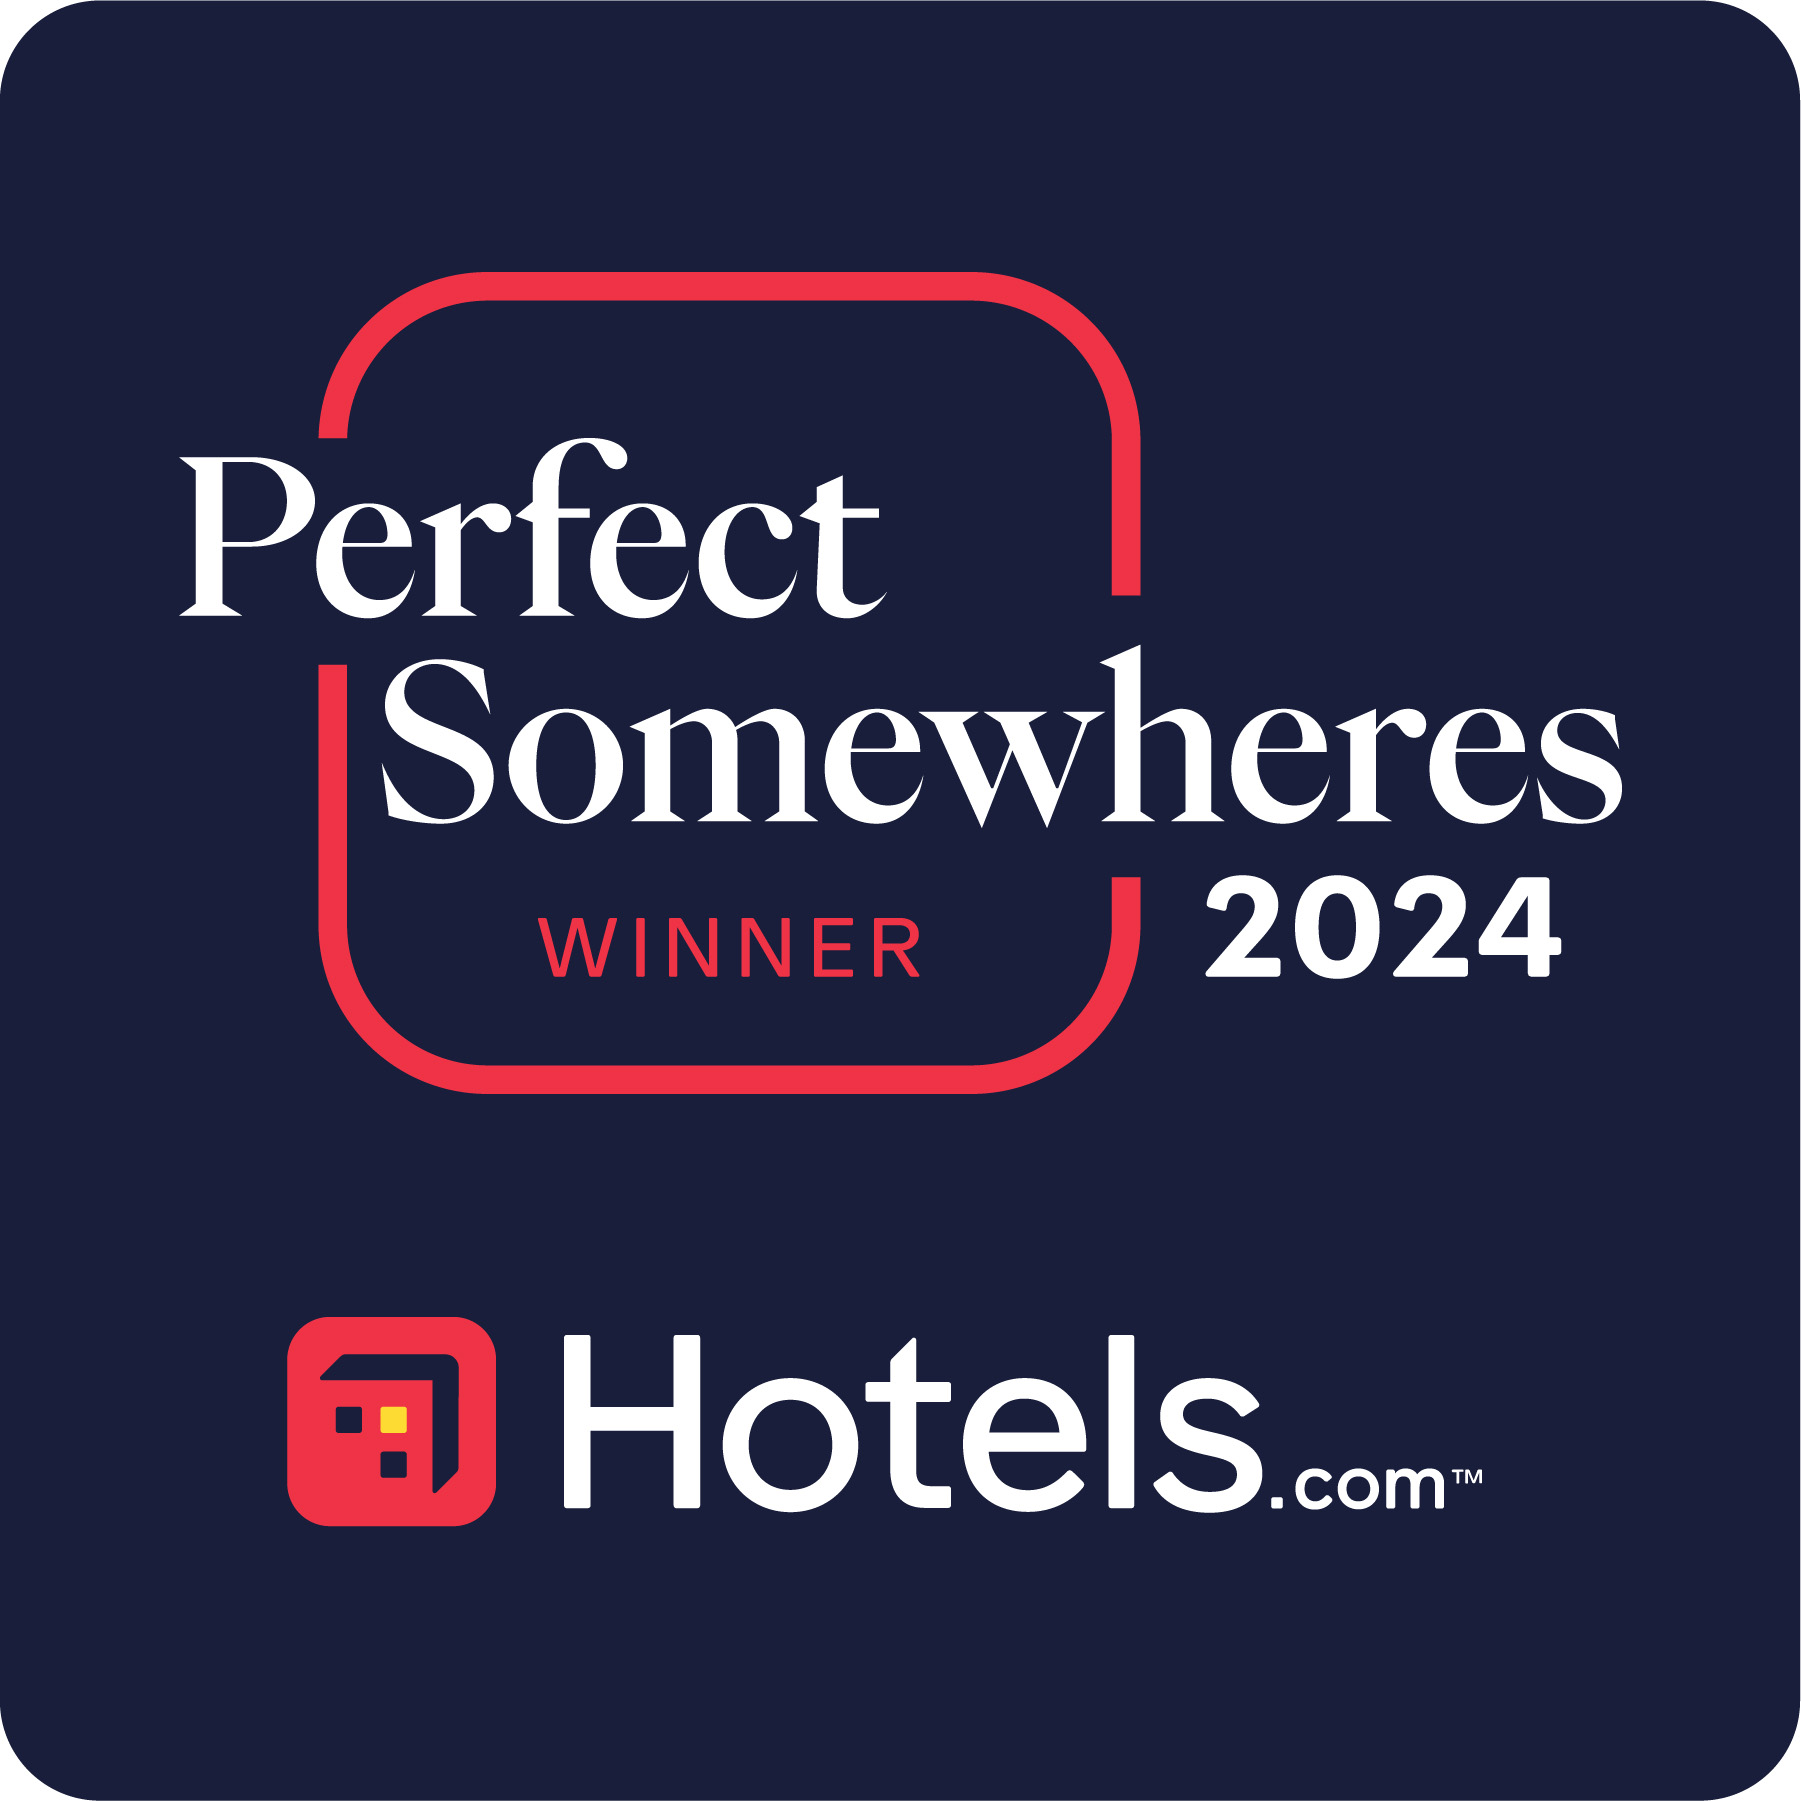 HOTELS.COM ANNOUNCES 'PERFECT SOMEWHERES' 2024, AWARDED FROM THE TOP 1% OF HOTELS GLOBALLY